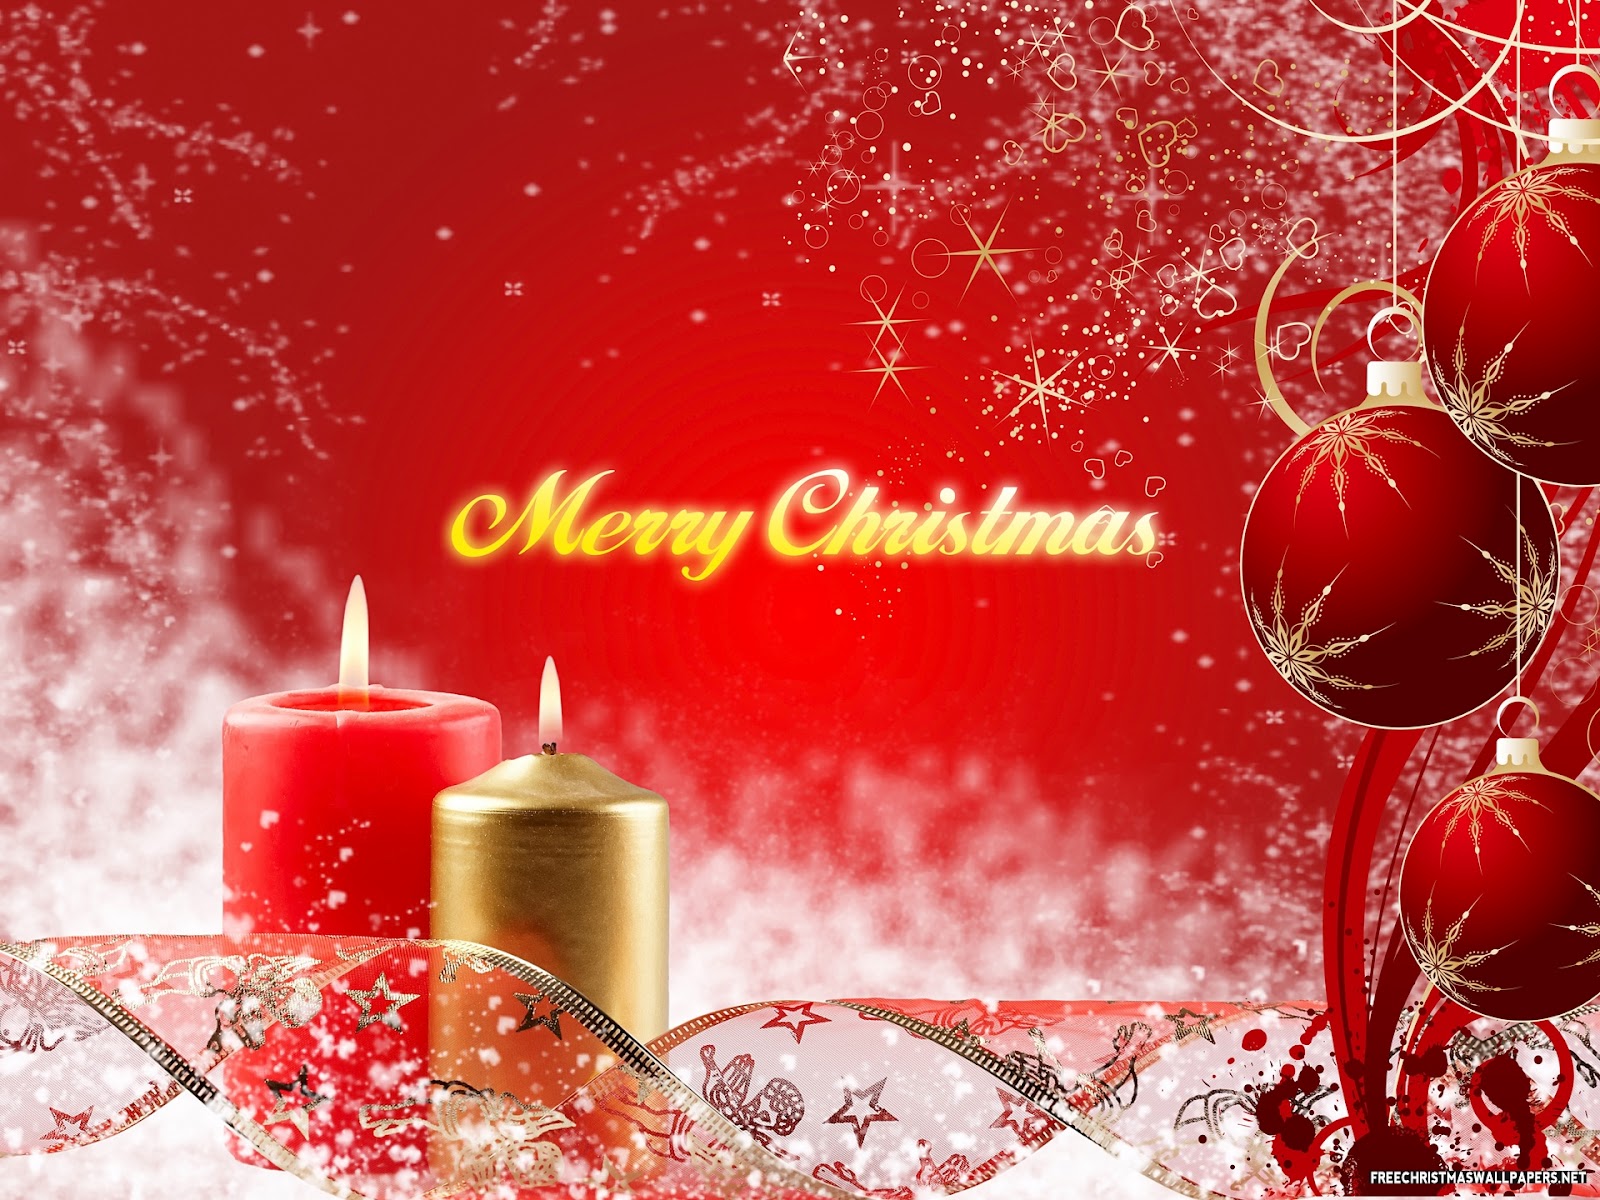 Hd Christmas Wallpapers - Christmas Images Wishes Hd - HD Wallpaper 